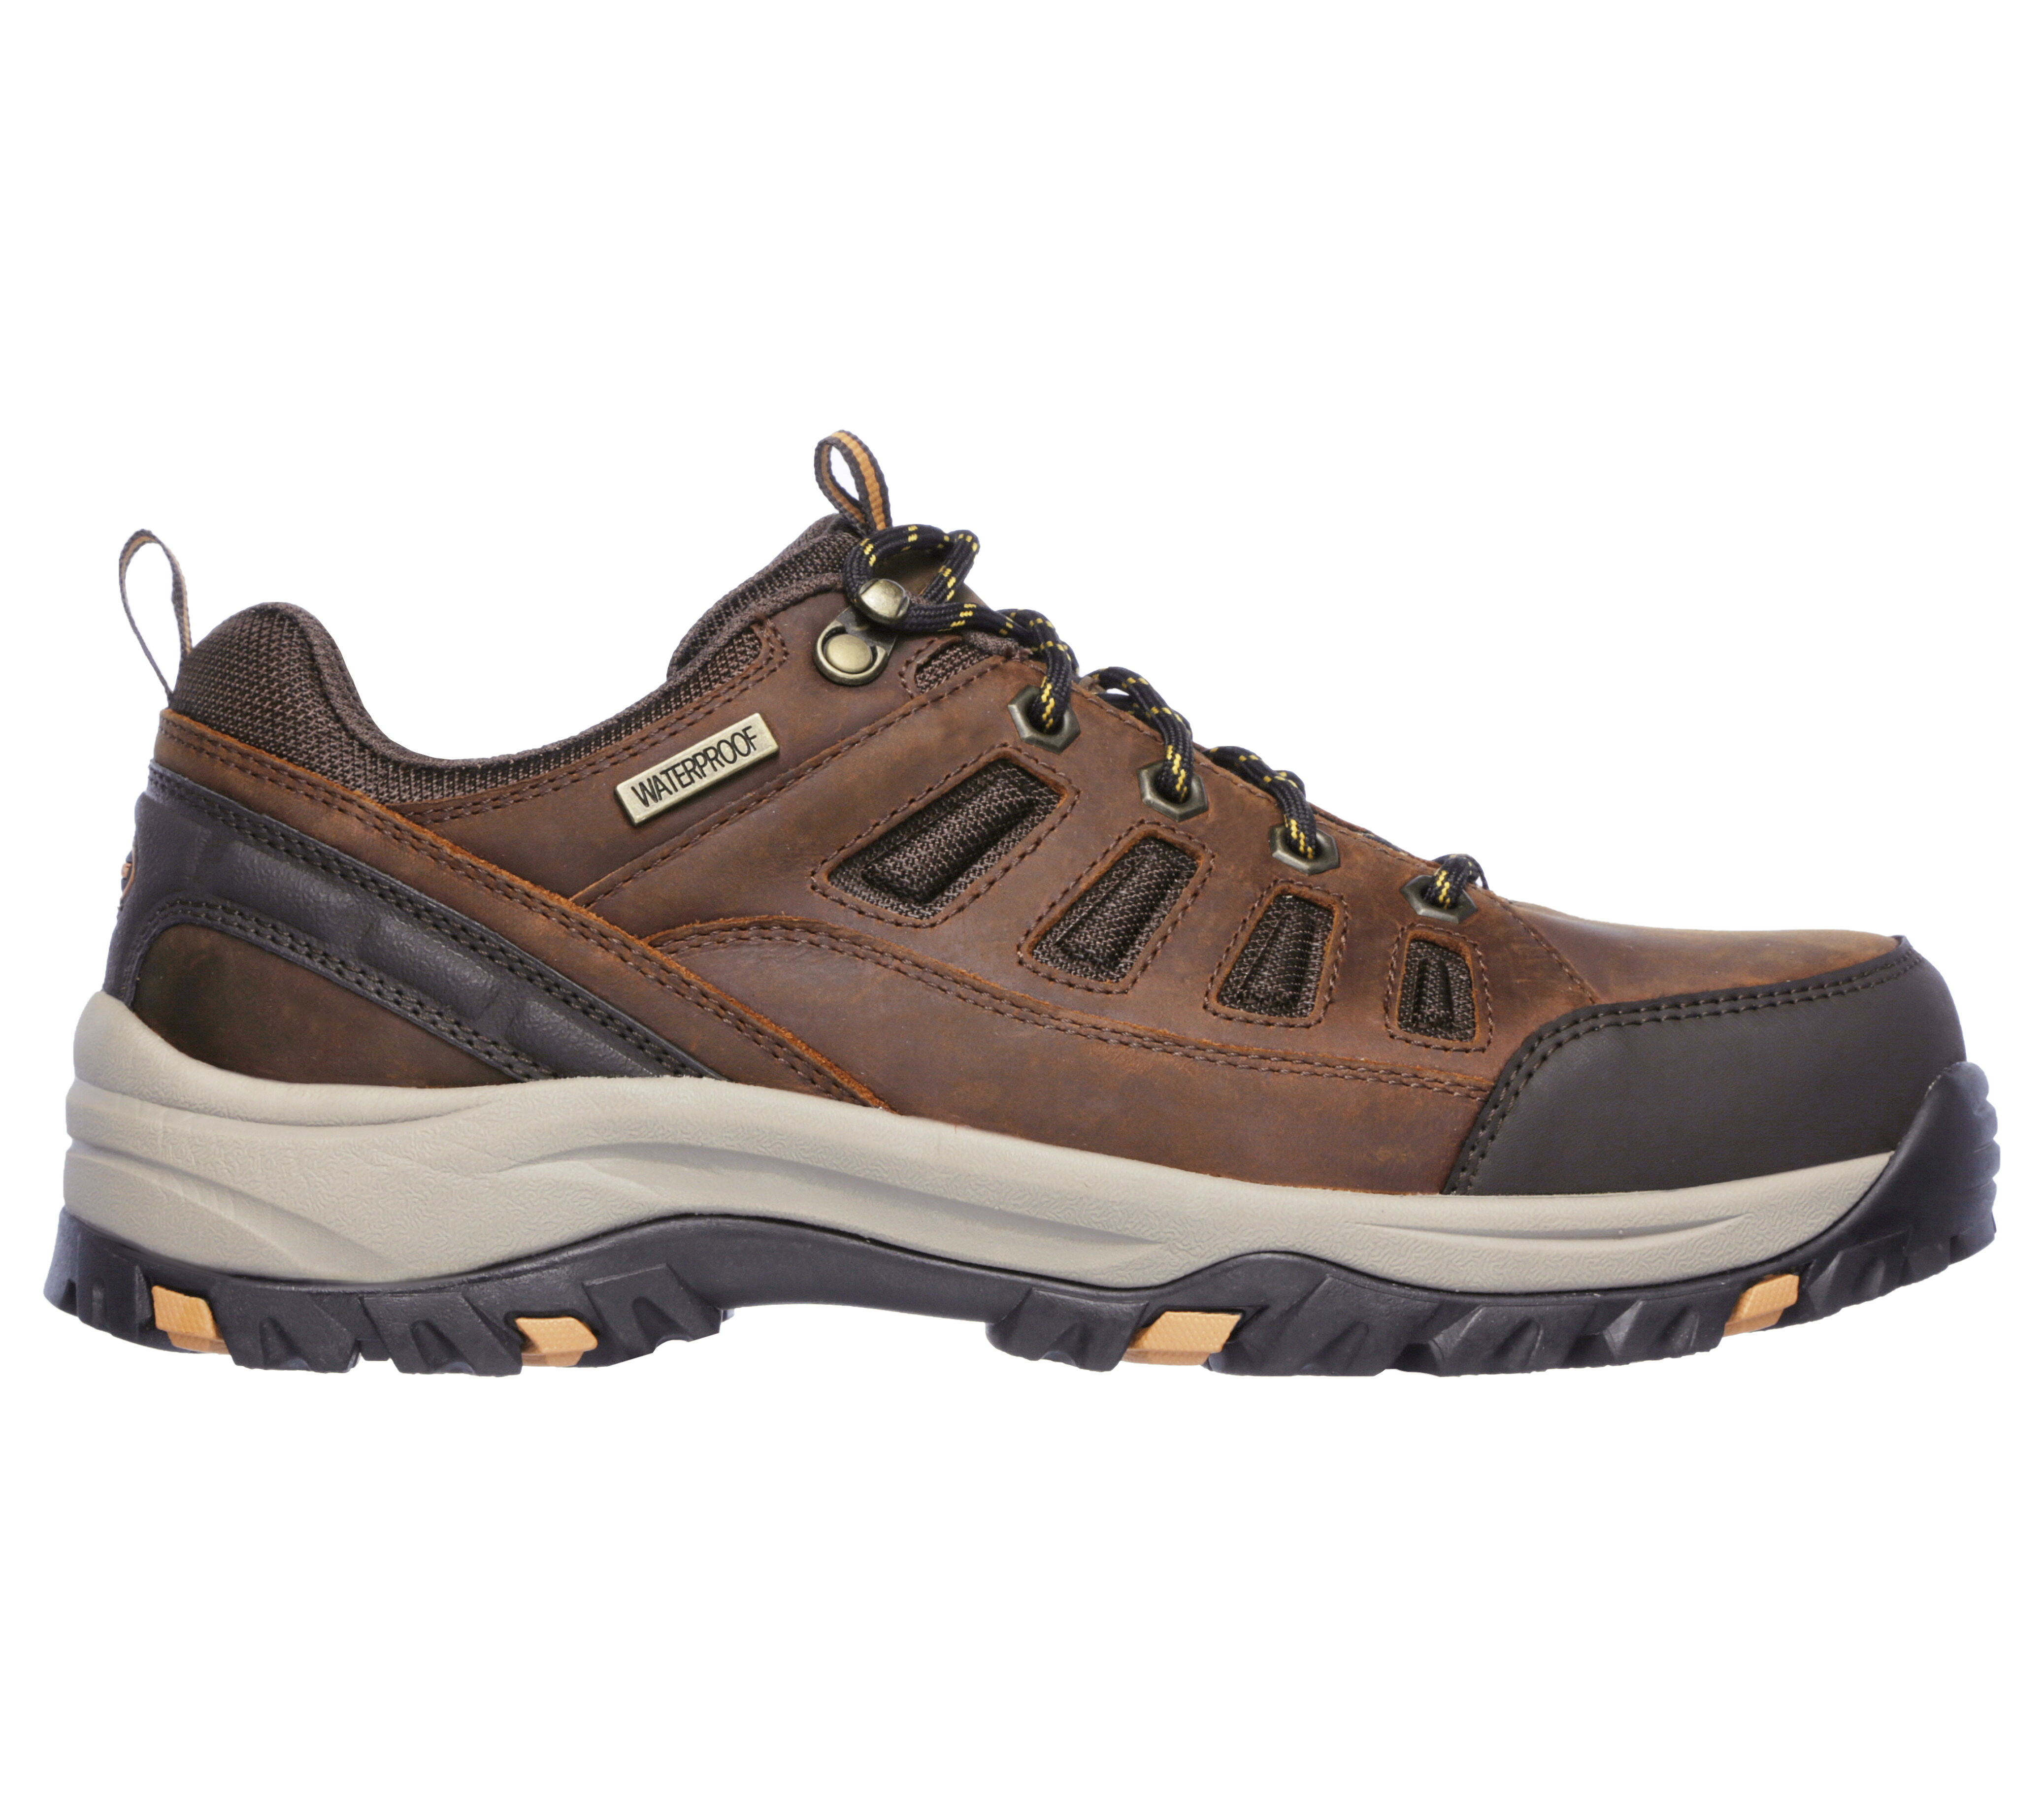 skechers shoes for hiking